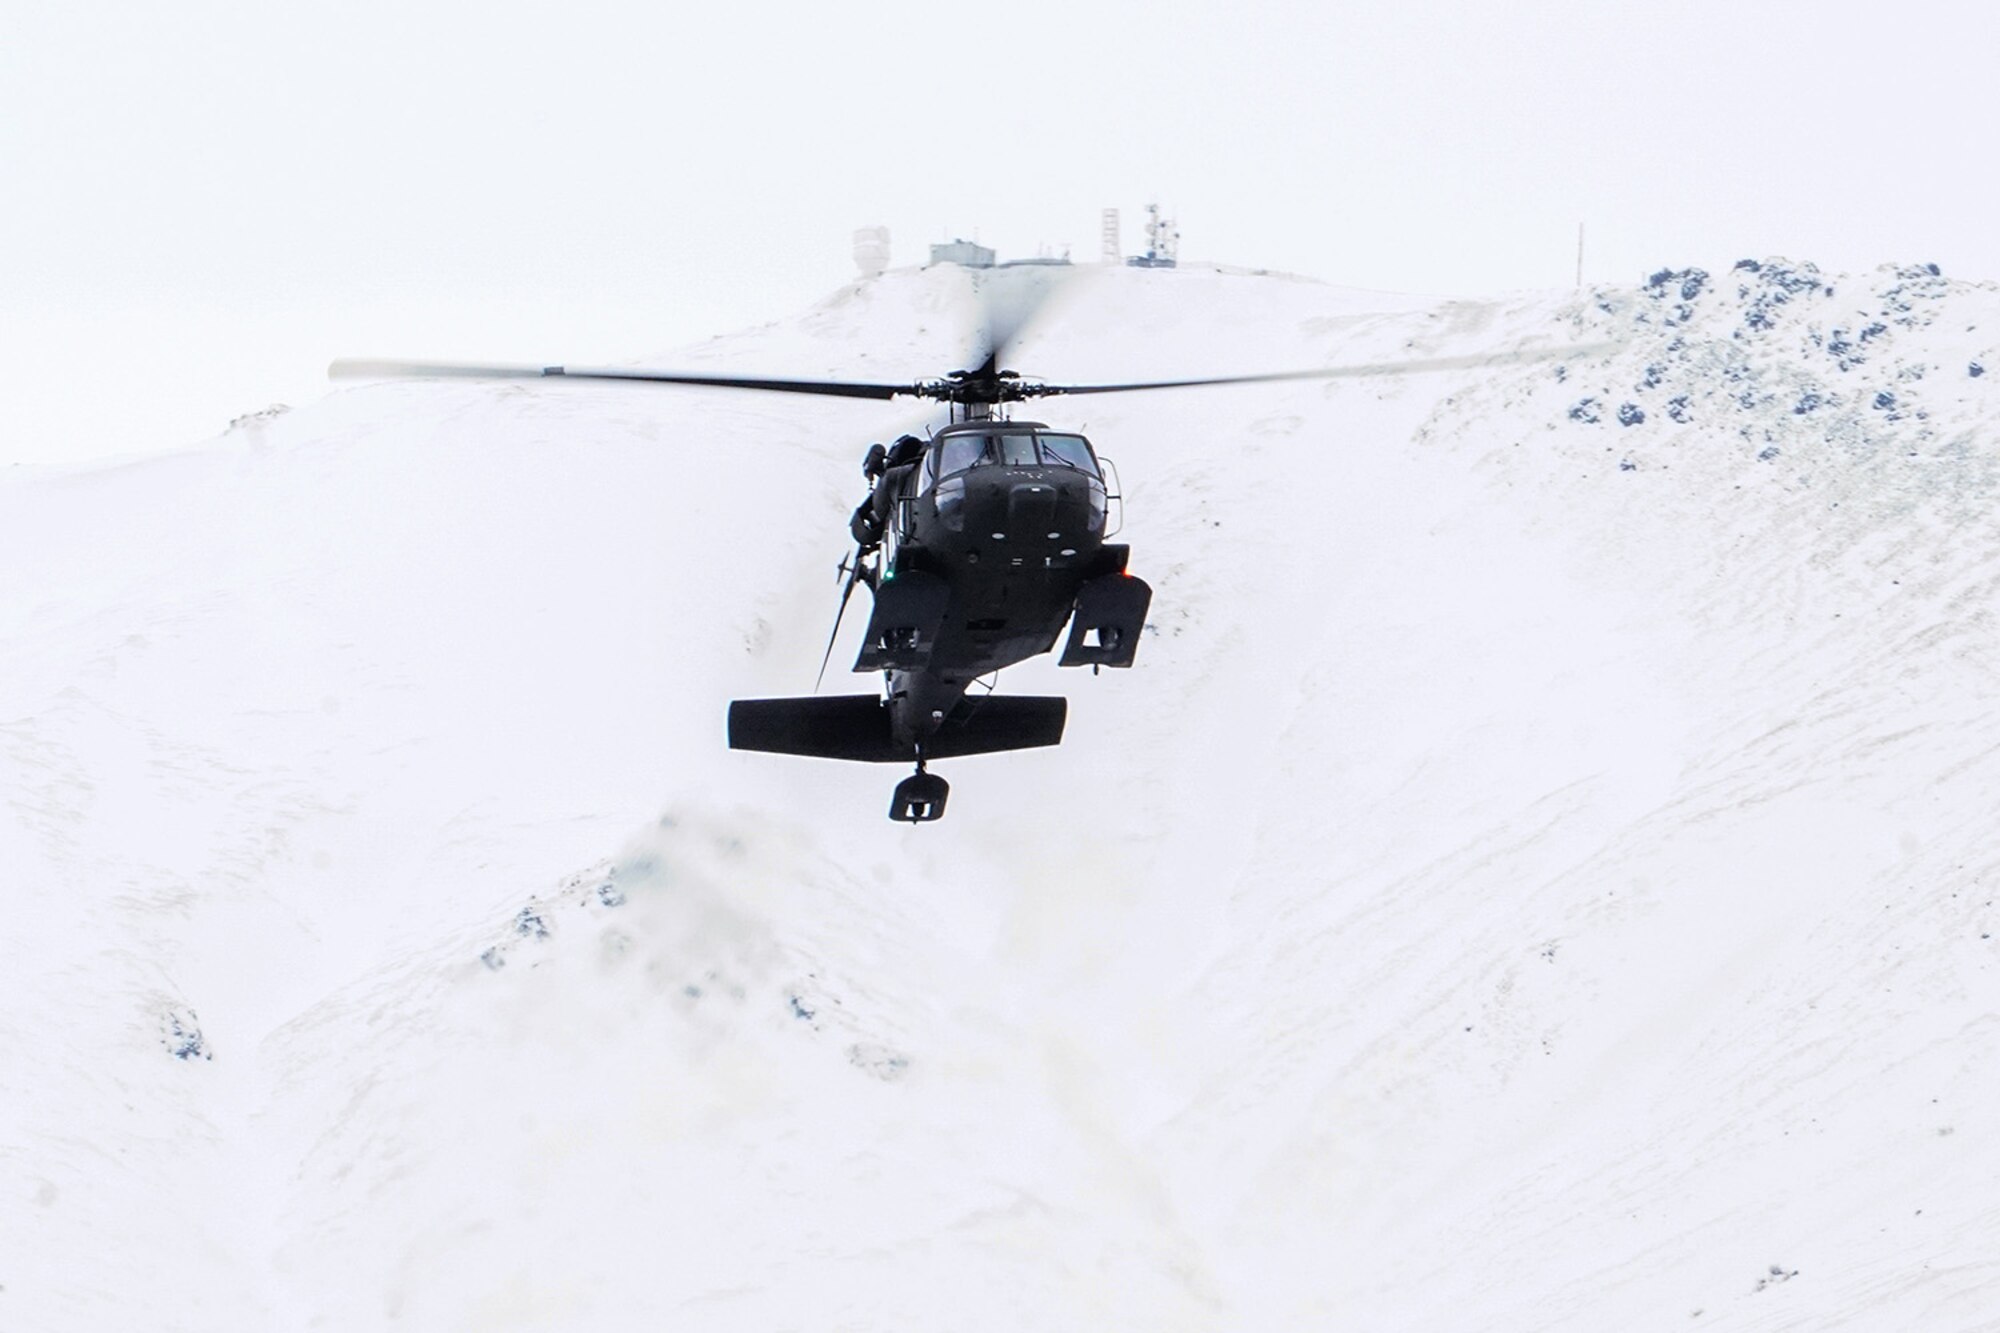 A UH-60 Black Hawk helicopter from the Alaska Army National Guard approaches Neibhur Drop Zone, Nov. 26, 2019, to assist Soldiers assigned to the 6th Brigade Engineer Battalion (Airborne), 4th Infantry Brigade Combat Team (Airborne), 25th Infantry Division, U.S. Army Alaska, in honing their life-saving and Medevac hoist skills for the paratroopers’ upcoming rotation to the Joint Readiness Training Center at Fort Polk, La.